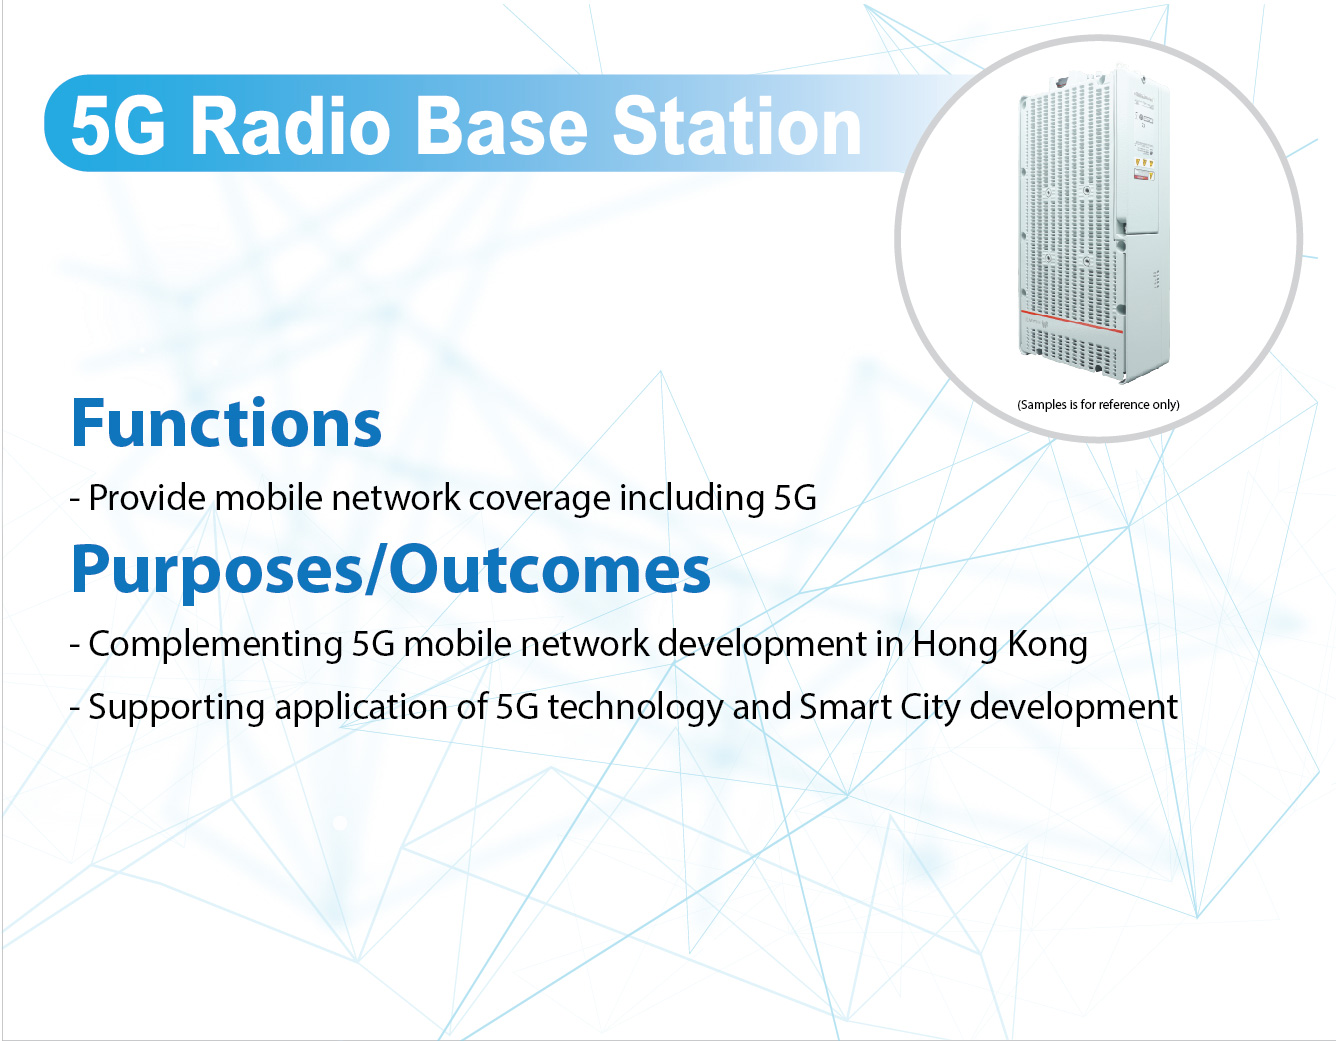 5G Radio Base Station,
					Functions -
					Provide mobile network coverage including 5G.

					Purposes/Outcomes -
					Complementing 5G mobile network development in Hong Kong.
					Supporting application of 5G technology and Smart City development